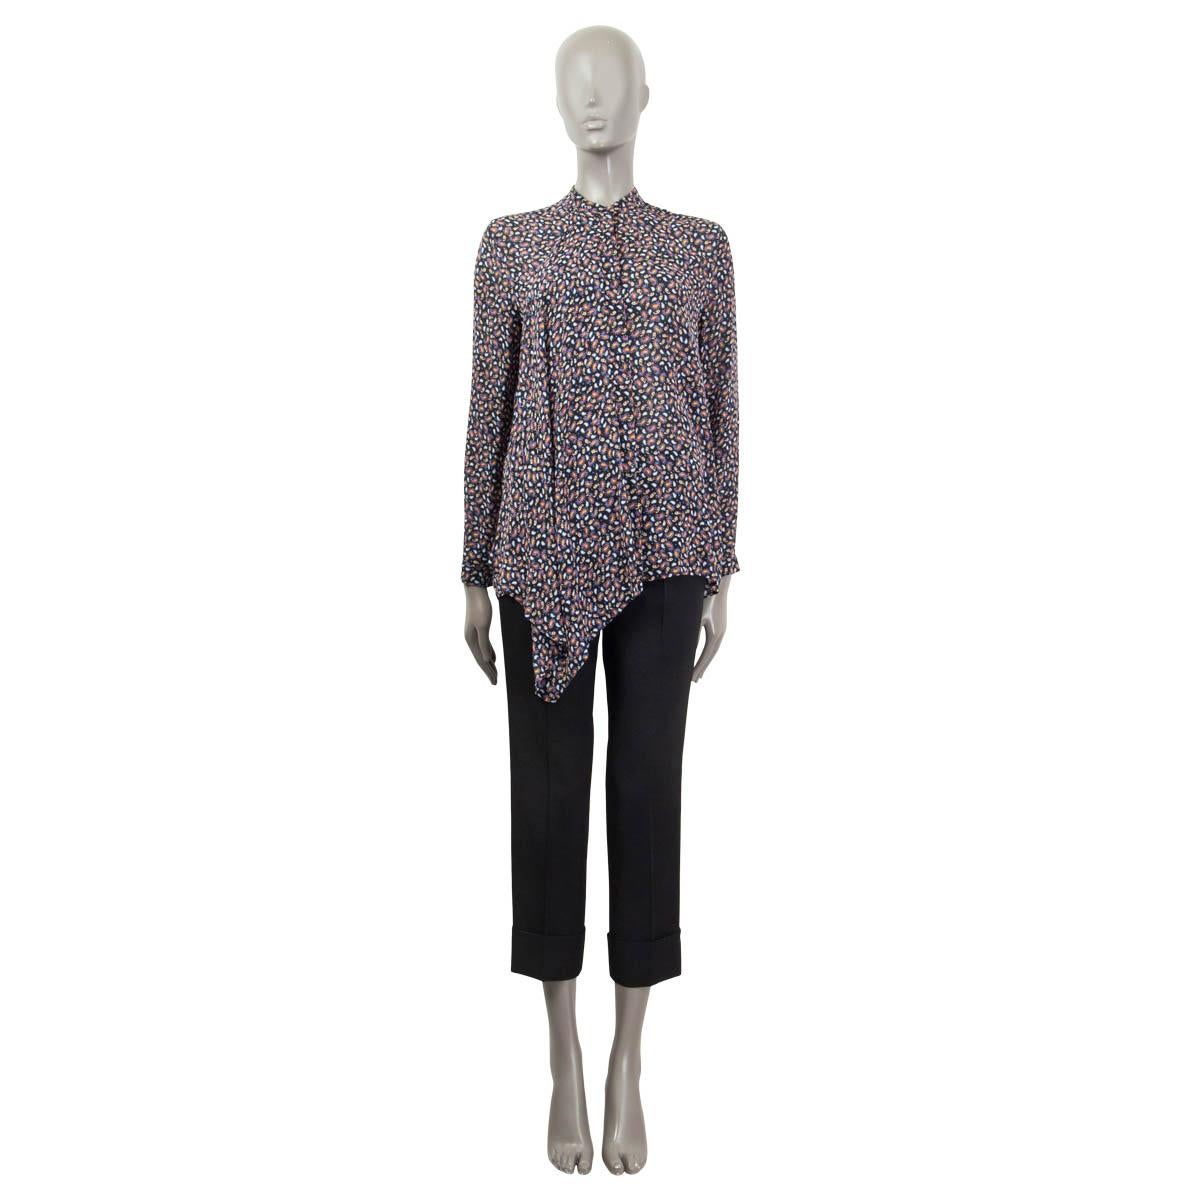 100% authentic Etro sheer asymmetrical paisley print shirt in black, yellow, blue and off-white silk and elastane (assumed cause tag is missing). Features long sleeves and buttoned cuffs. Opens with concealed buttons on the front. Unlined. Has been